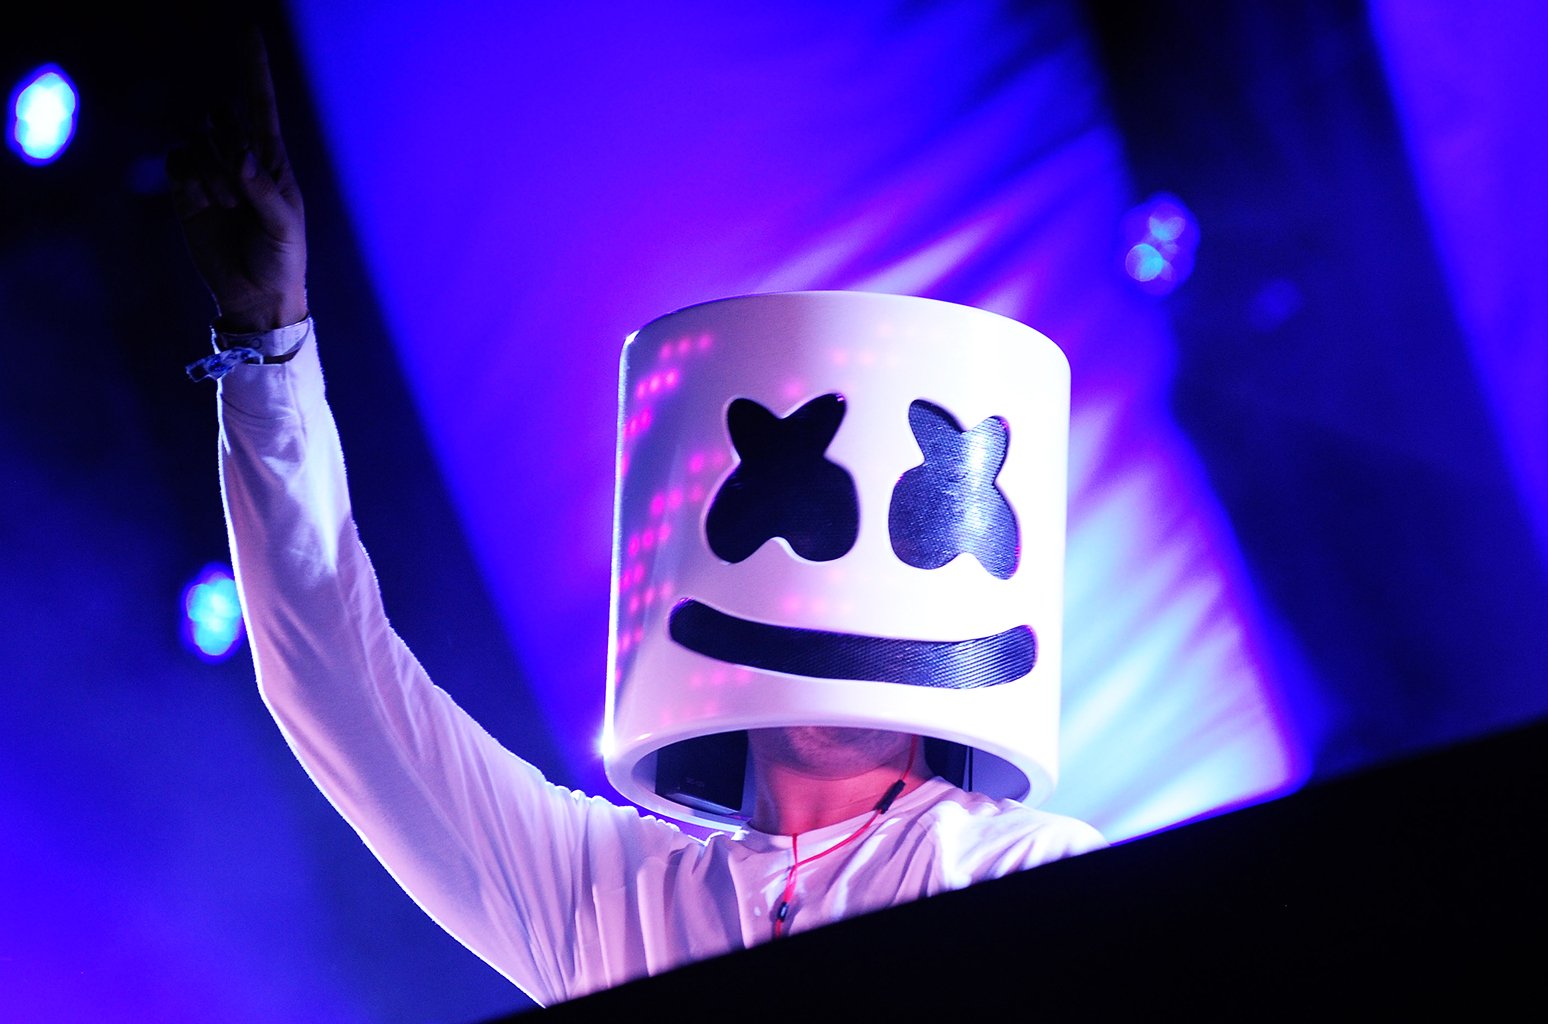 Free download Marshmello Wallpaper Full HD Pictures [1548x1024 ...